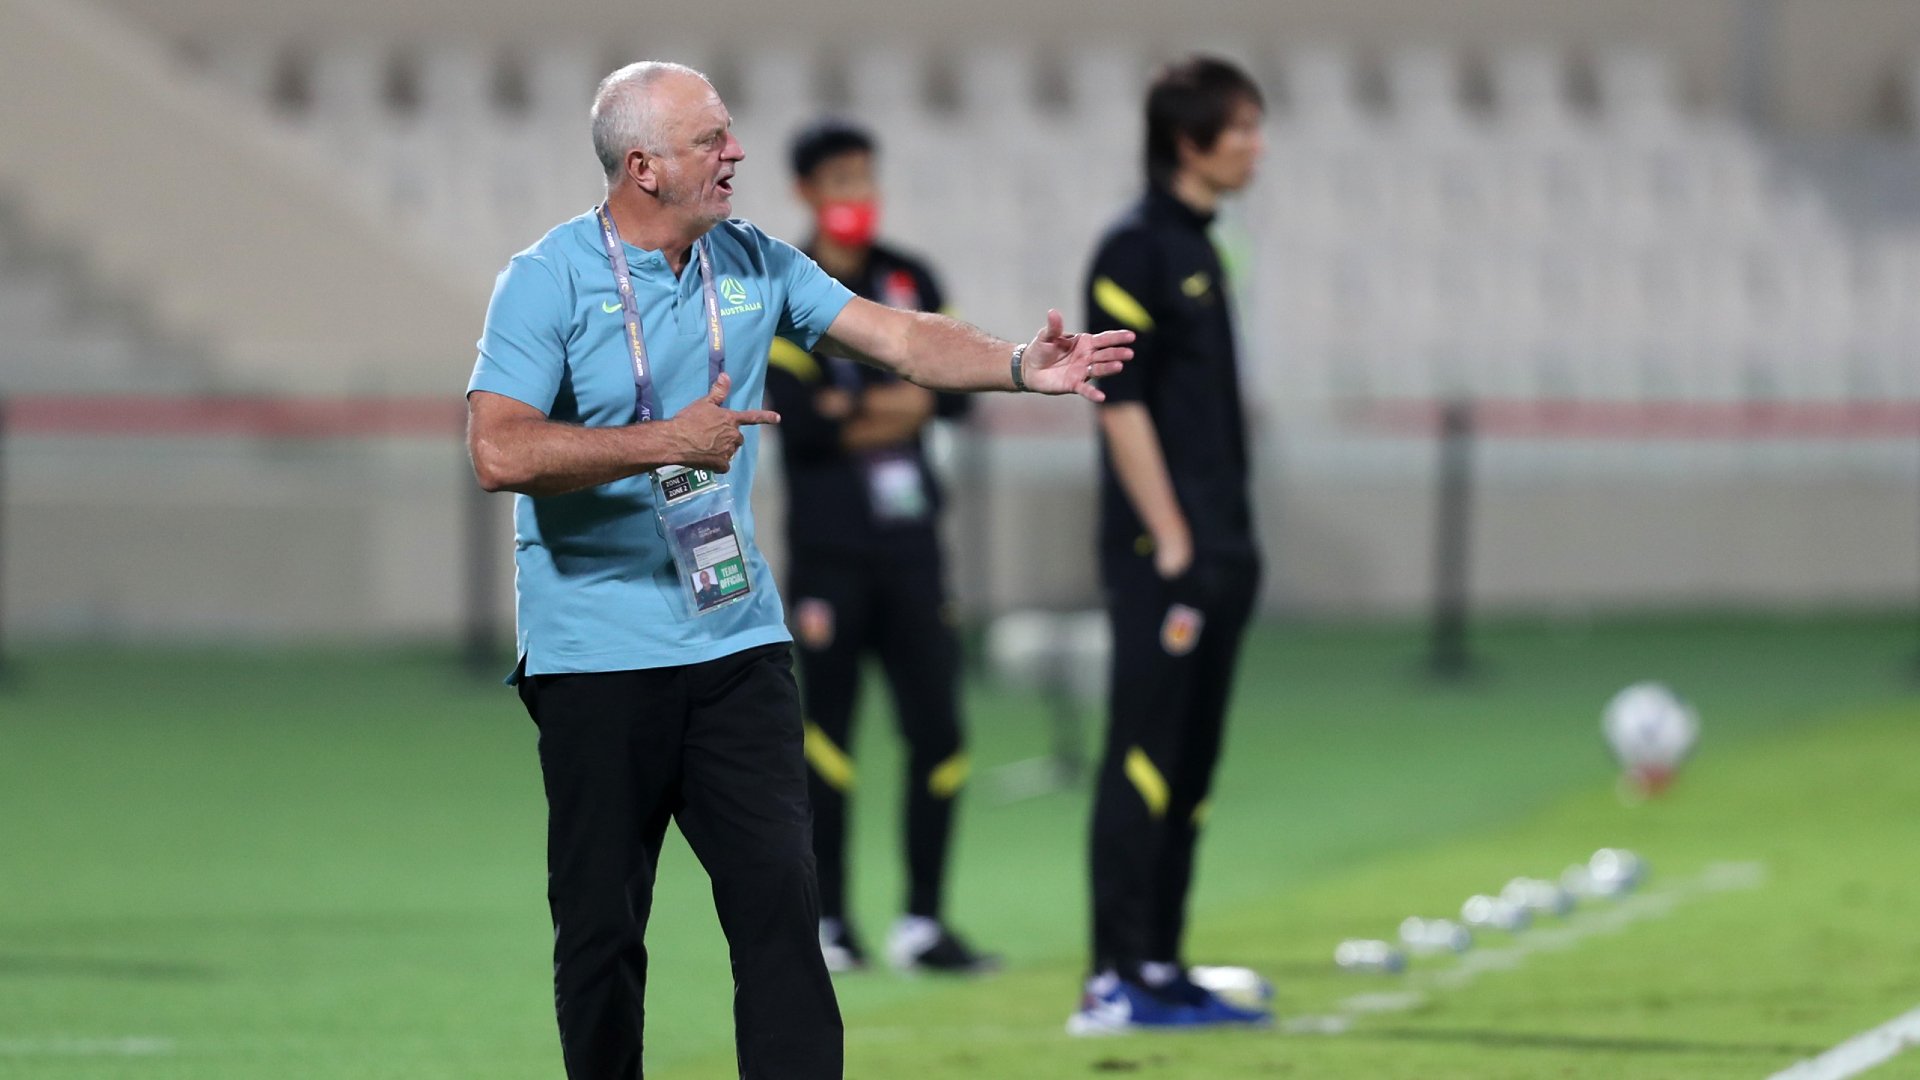 Socceroos vs China: What we learned as listless Australia sees pressure build on Graham Arnold